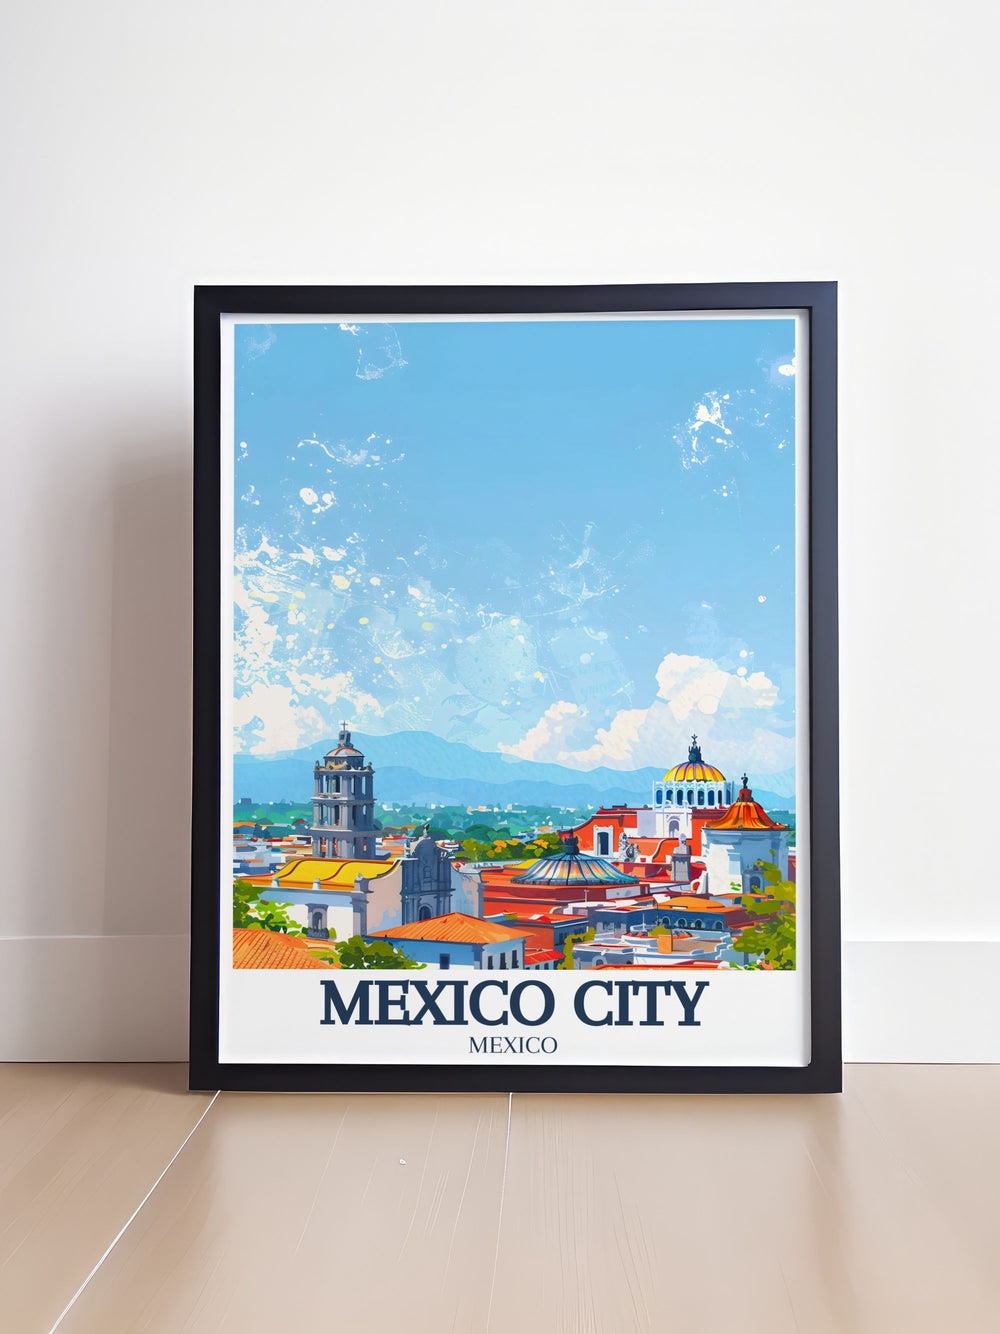 Beautiful Mexico City wall art showcasing Metropolitan cathedral Zocalo Chapultepec castle. This detailed print highlights the architectural splendor and cultural significance of these iconic landmarks making it an ideal addition to any space.